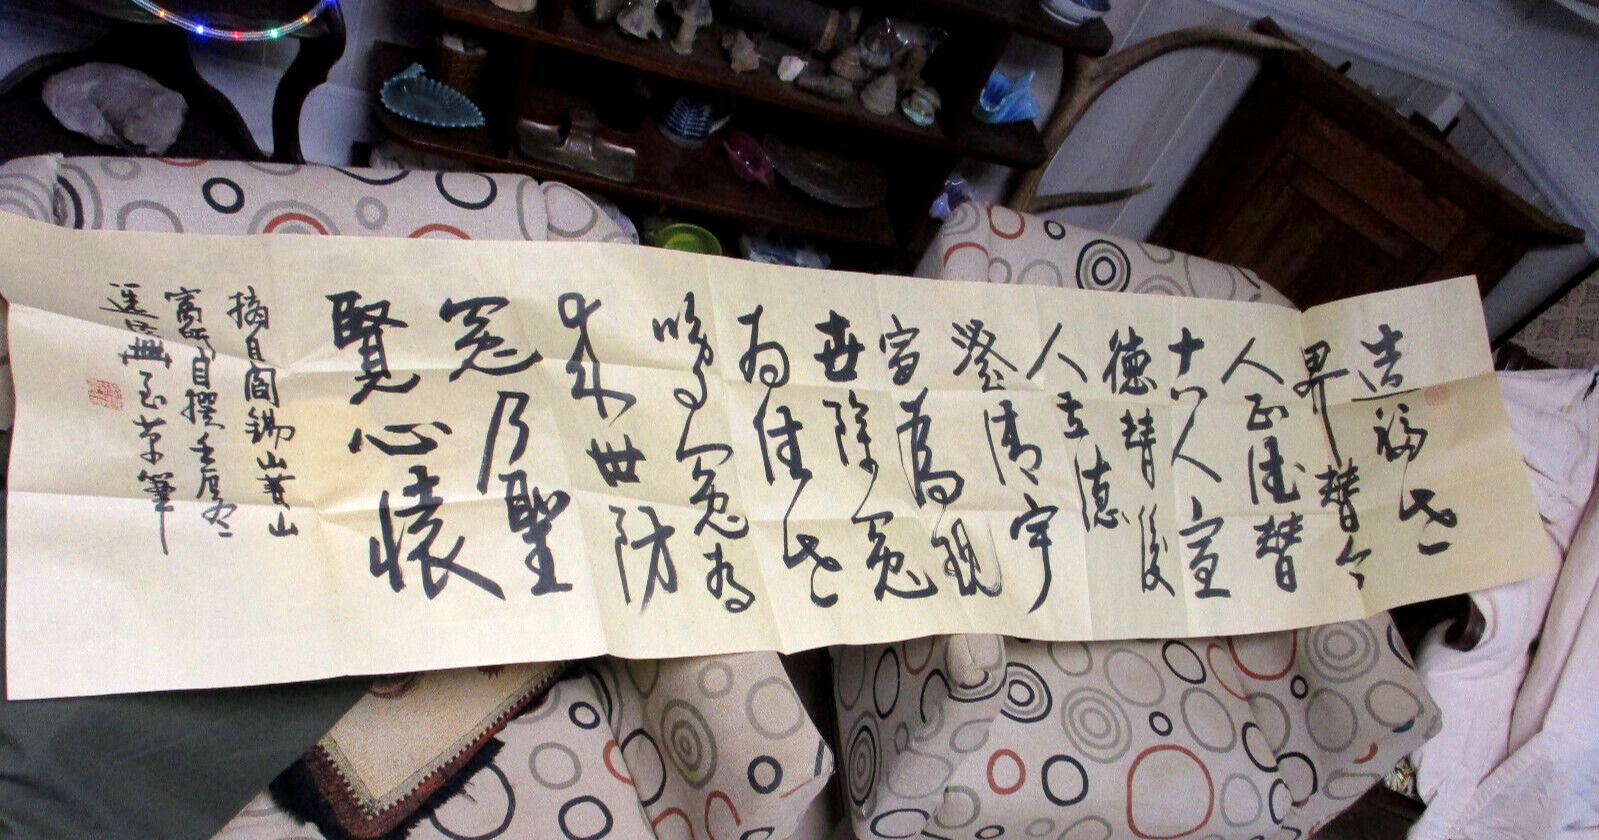 Chinese Calligraphy Scroll By Xuanjin Zhang On Gold Flake Paper + Documentation